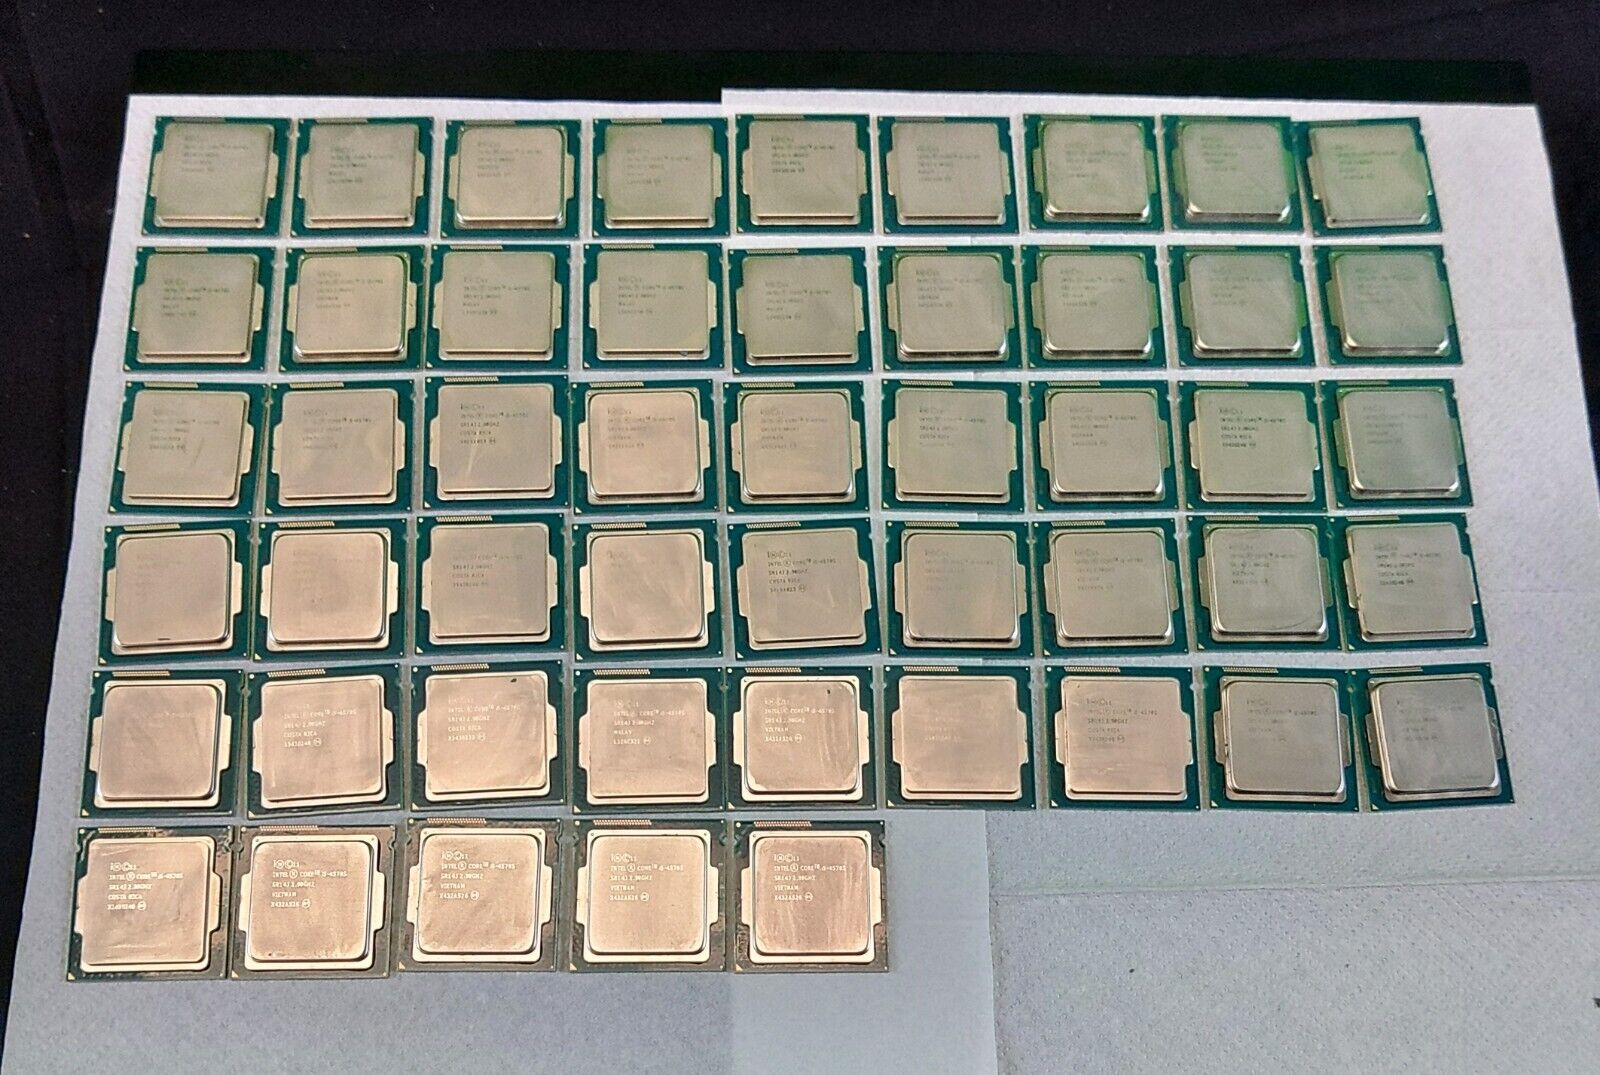 Lot of 50: i5-4570S 2.90 GHz Processors